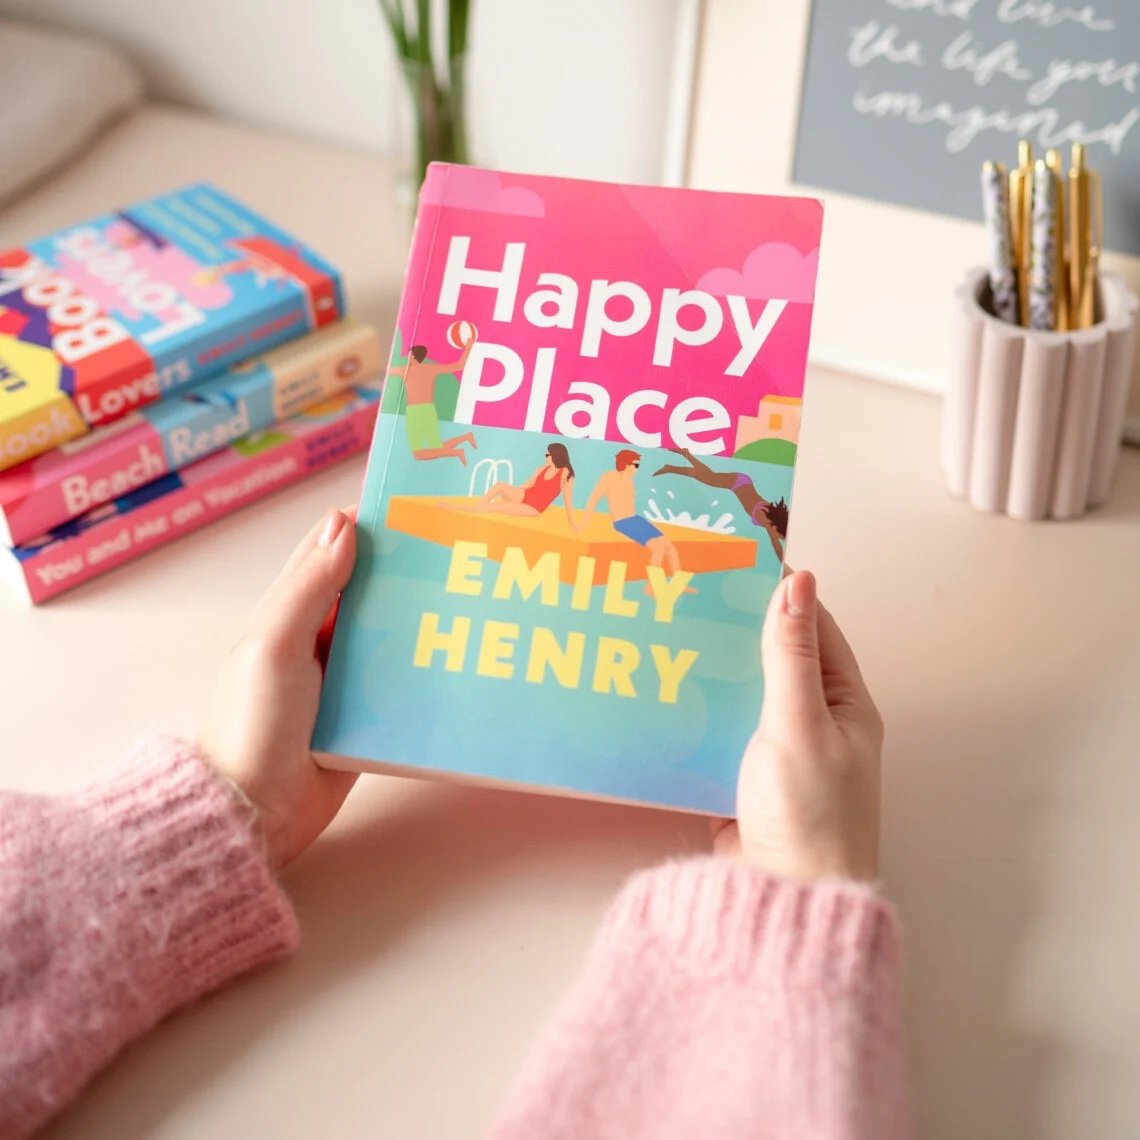 martha-brook-blog-post-emily-henry-happy-place-review-square-1140x1140.jpeg